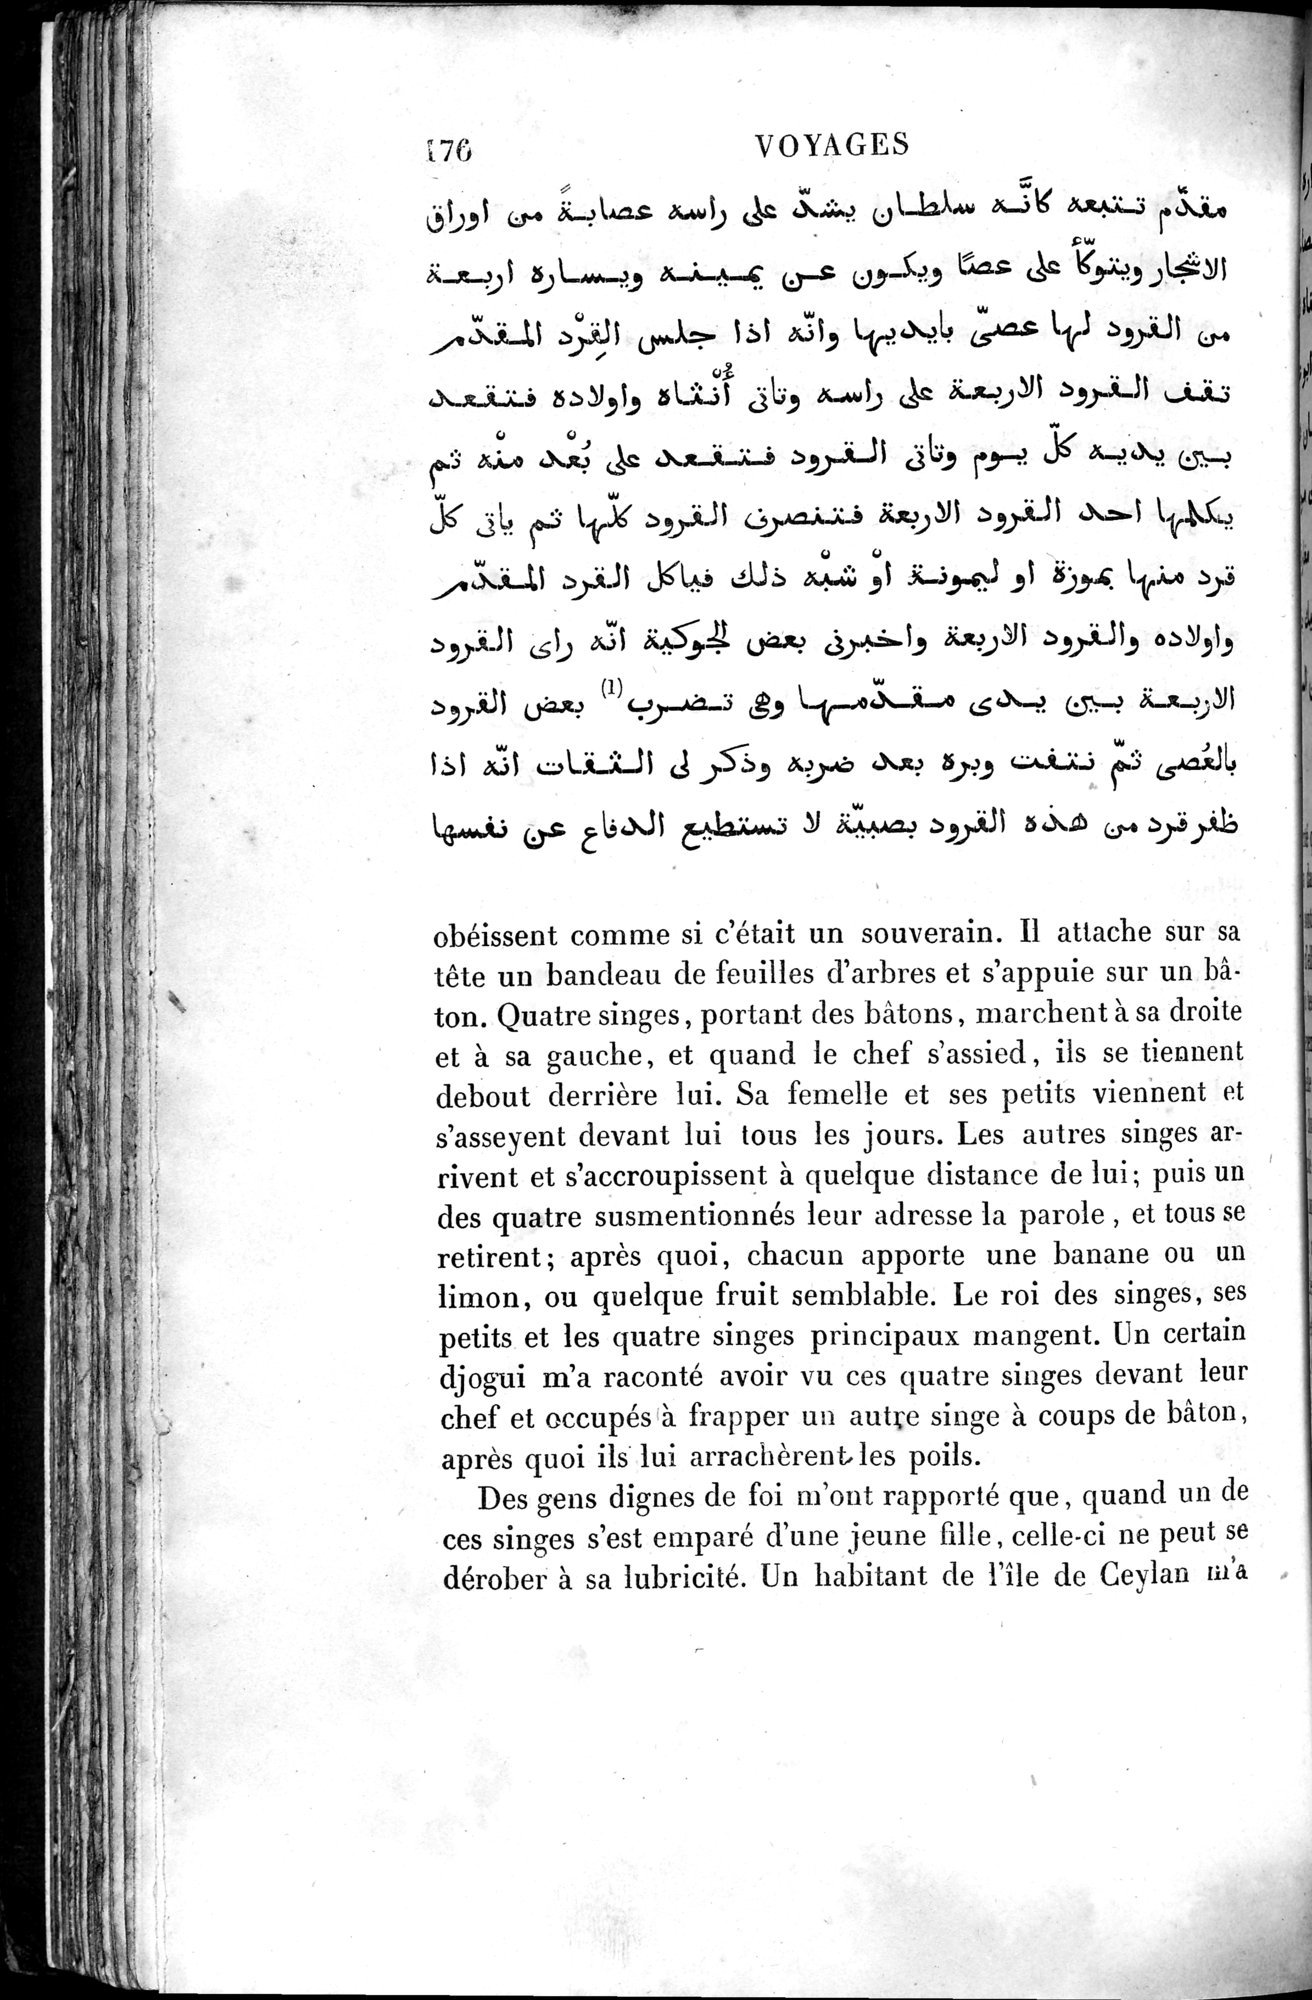 Voyages d'Ibn Batoutah : vol.4 / Page 188 (Grayscale High Resolution Image)